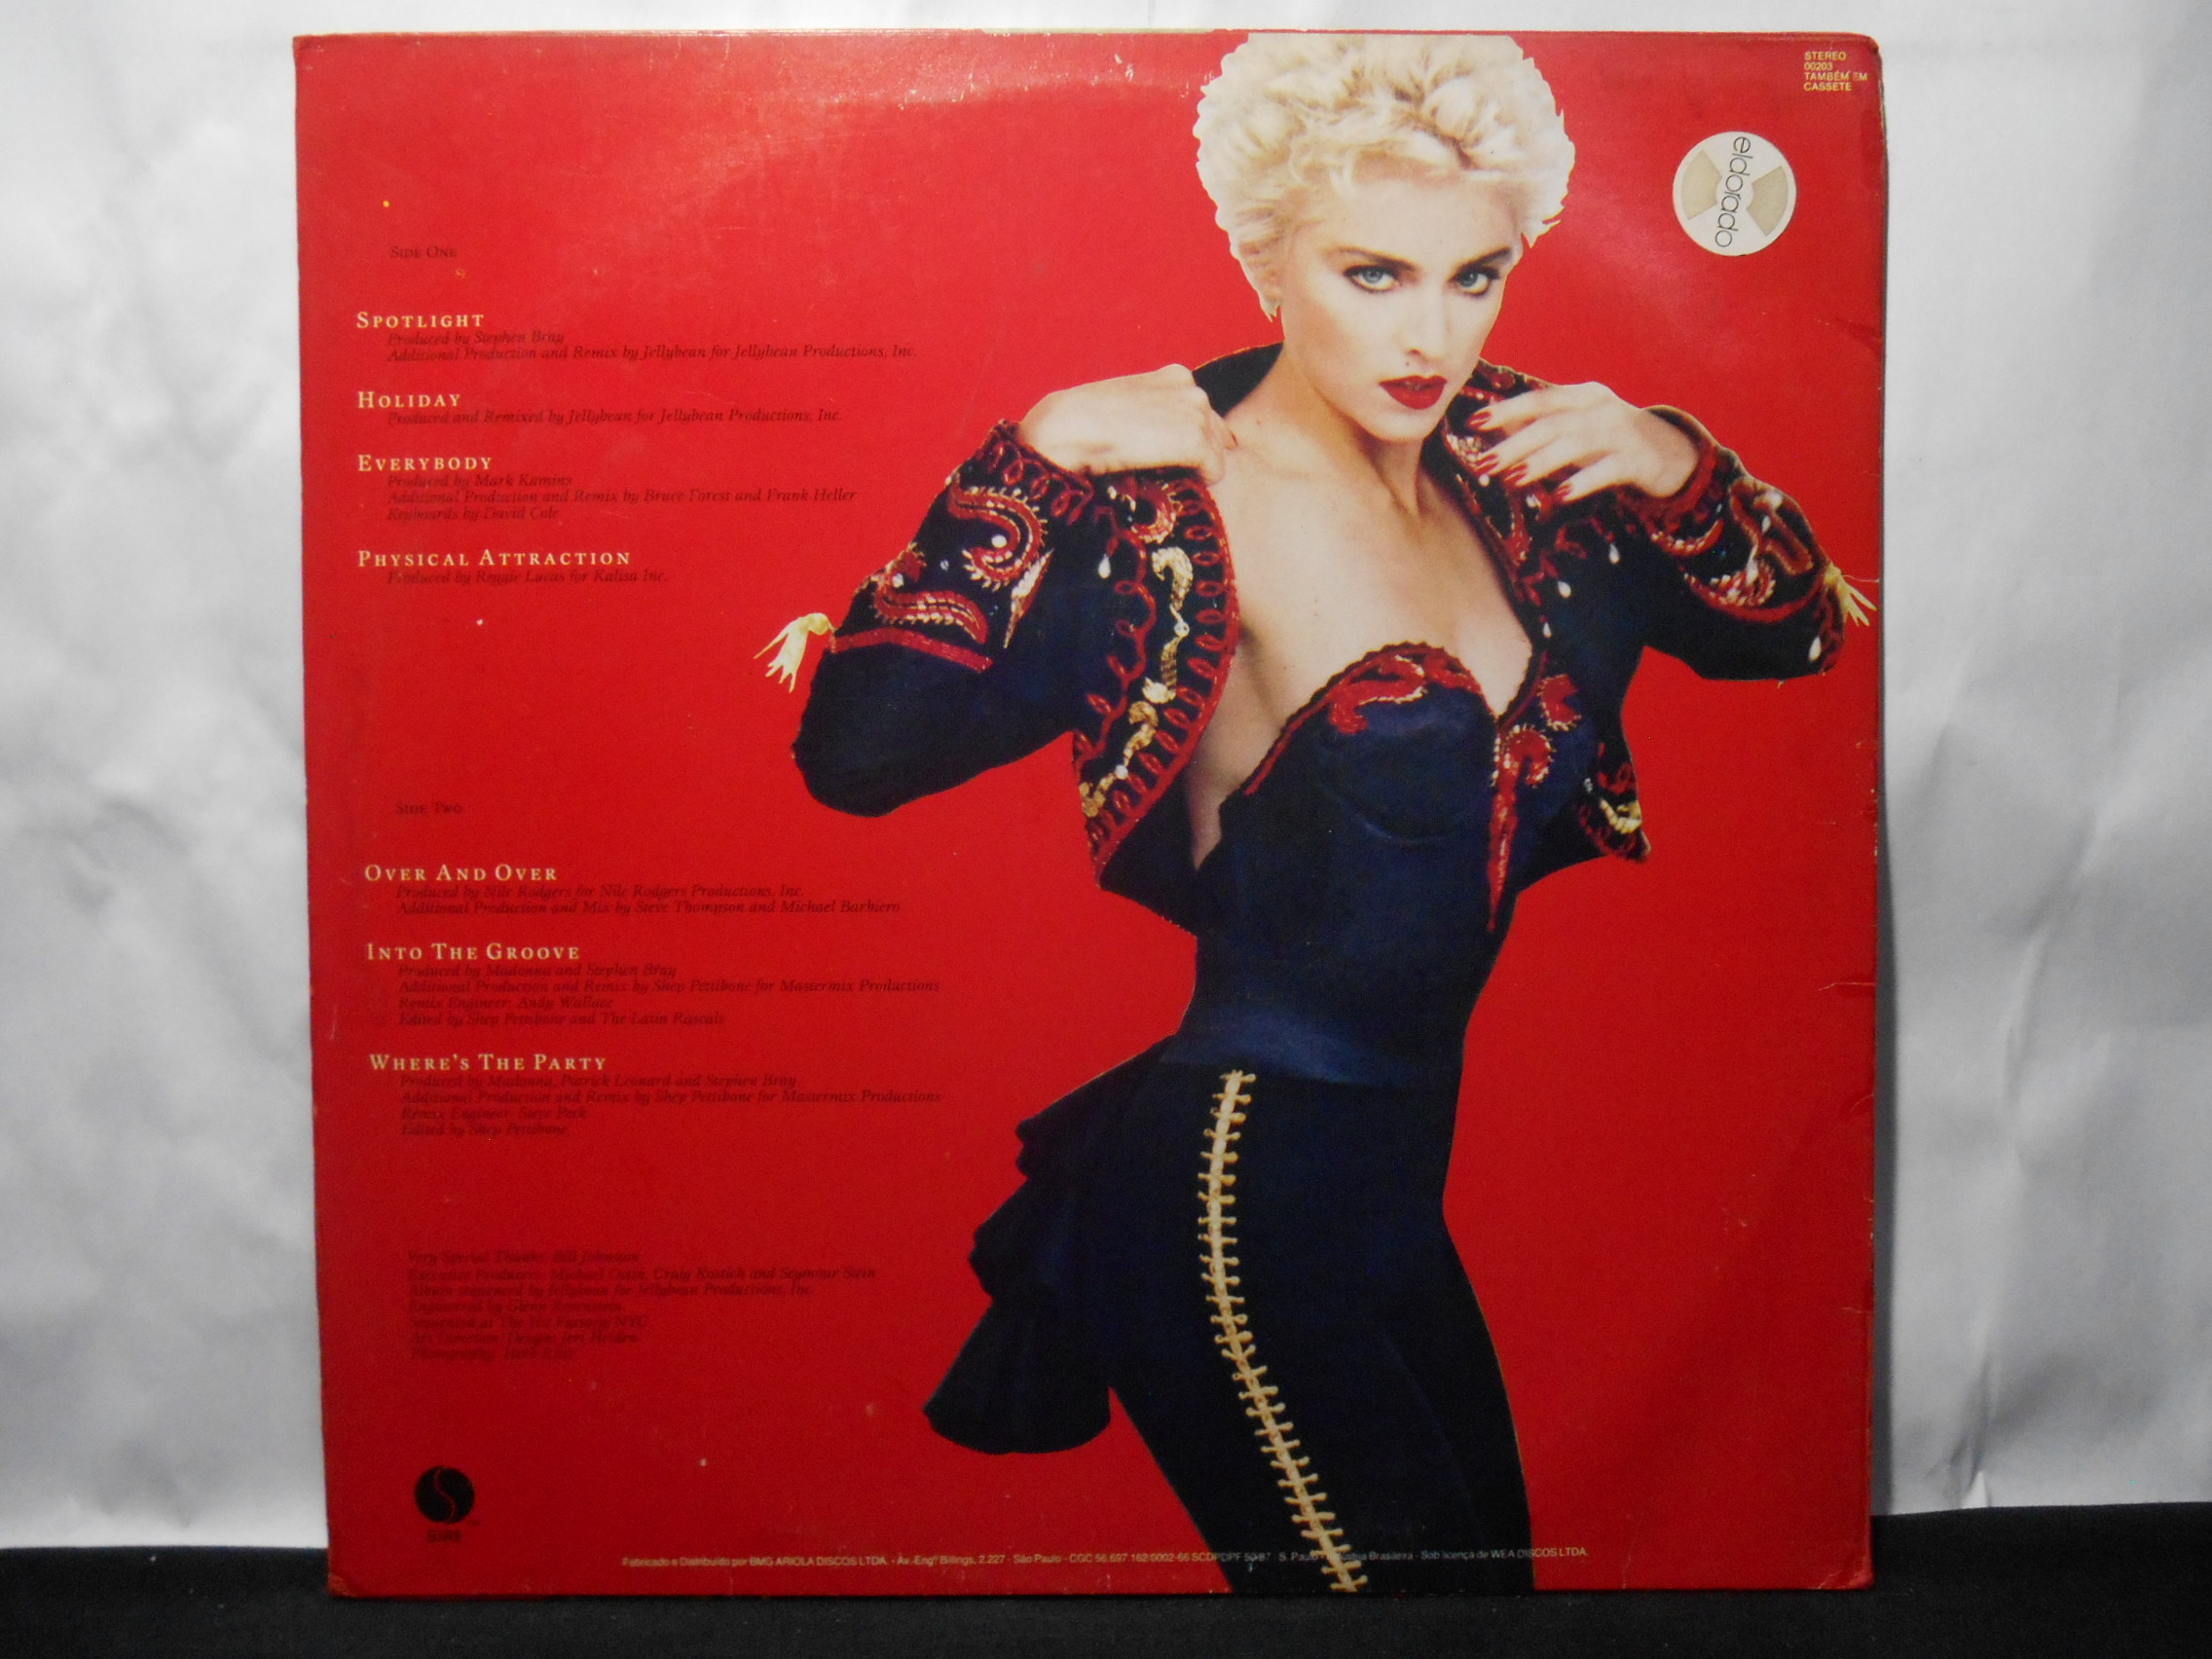 Vinil - Madonna - You Can Dance